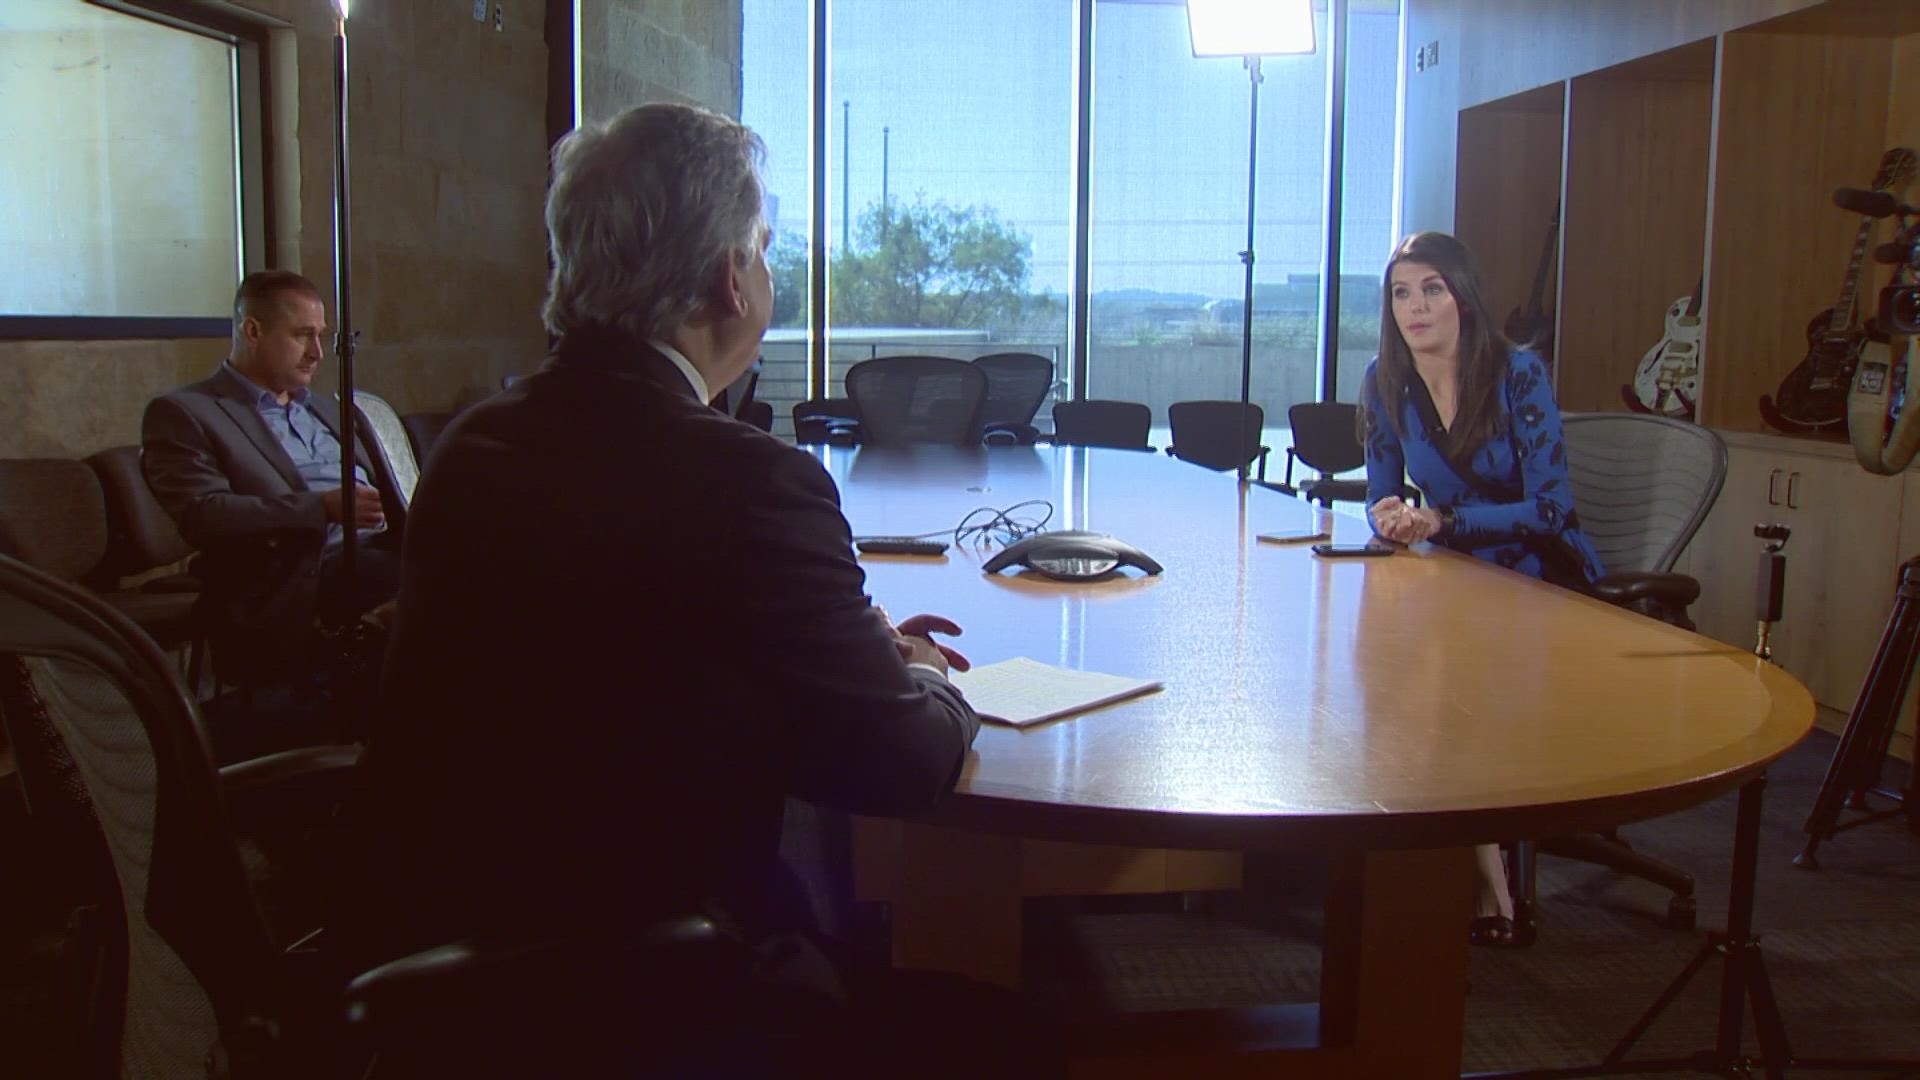 KVUE sat down with Mayor Steve Adler to recap the struggles Austin has faced this year and how the city is preparing to meet new challenges in the future.